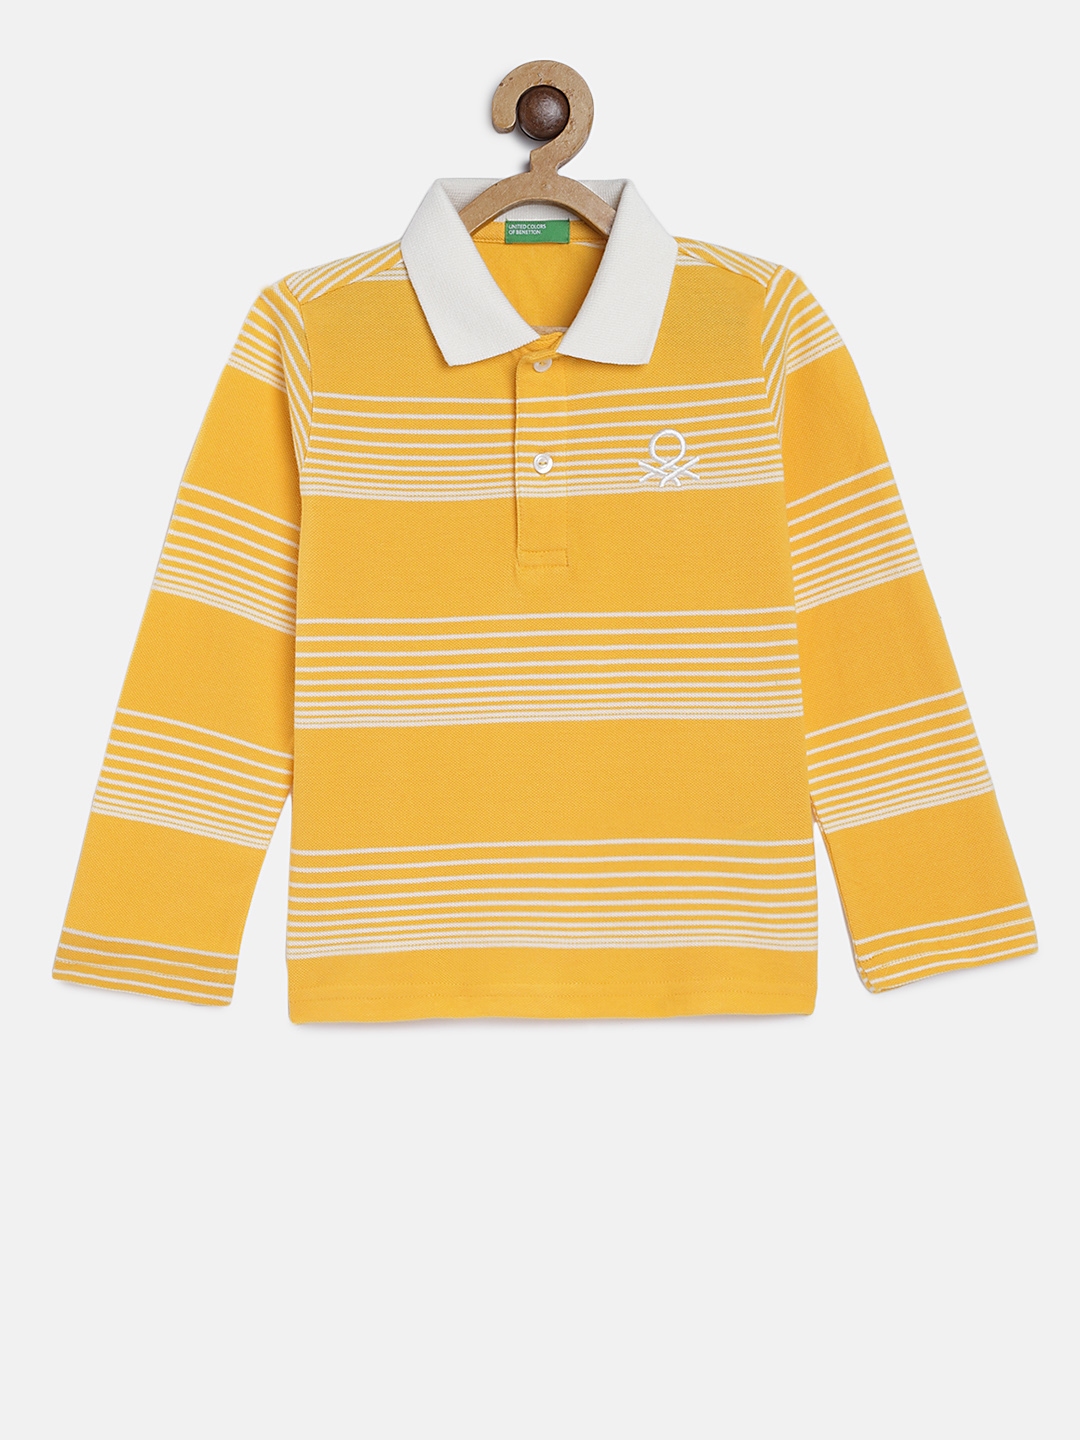 Buy United Colors Of Benetton Boys Mustard Yellow & White Striped Polo ...